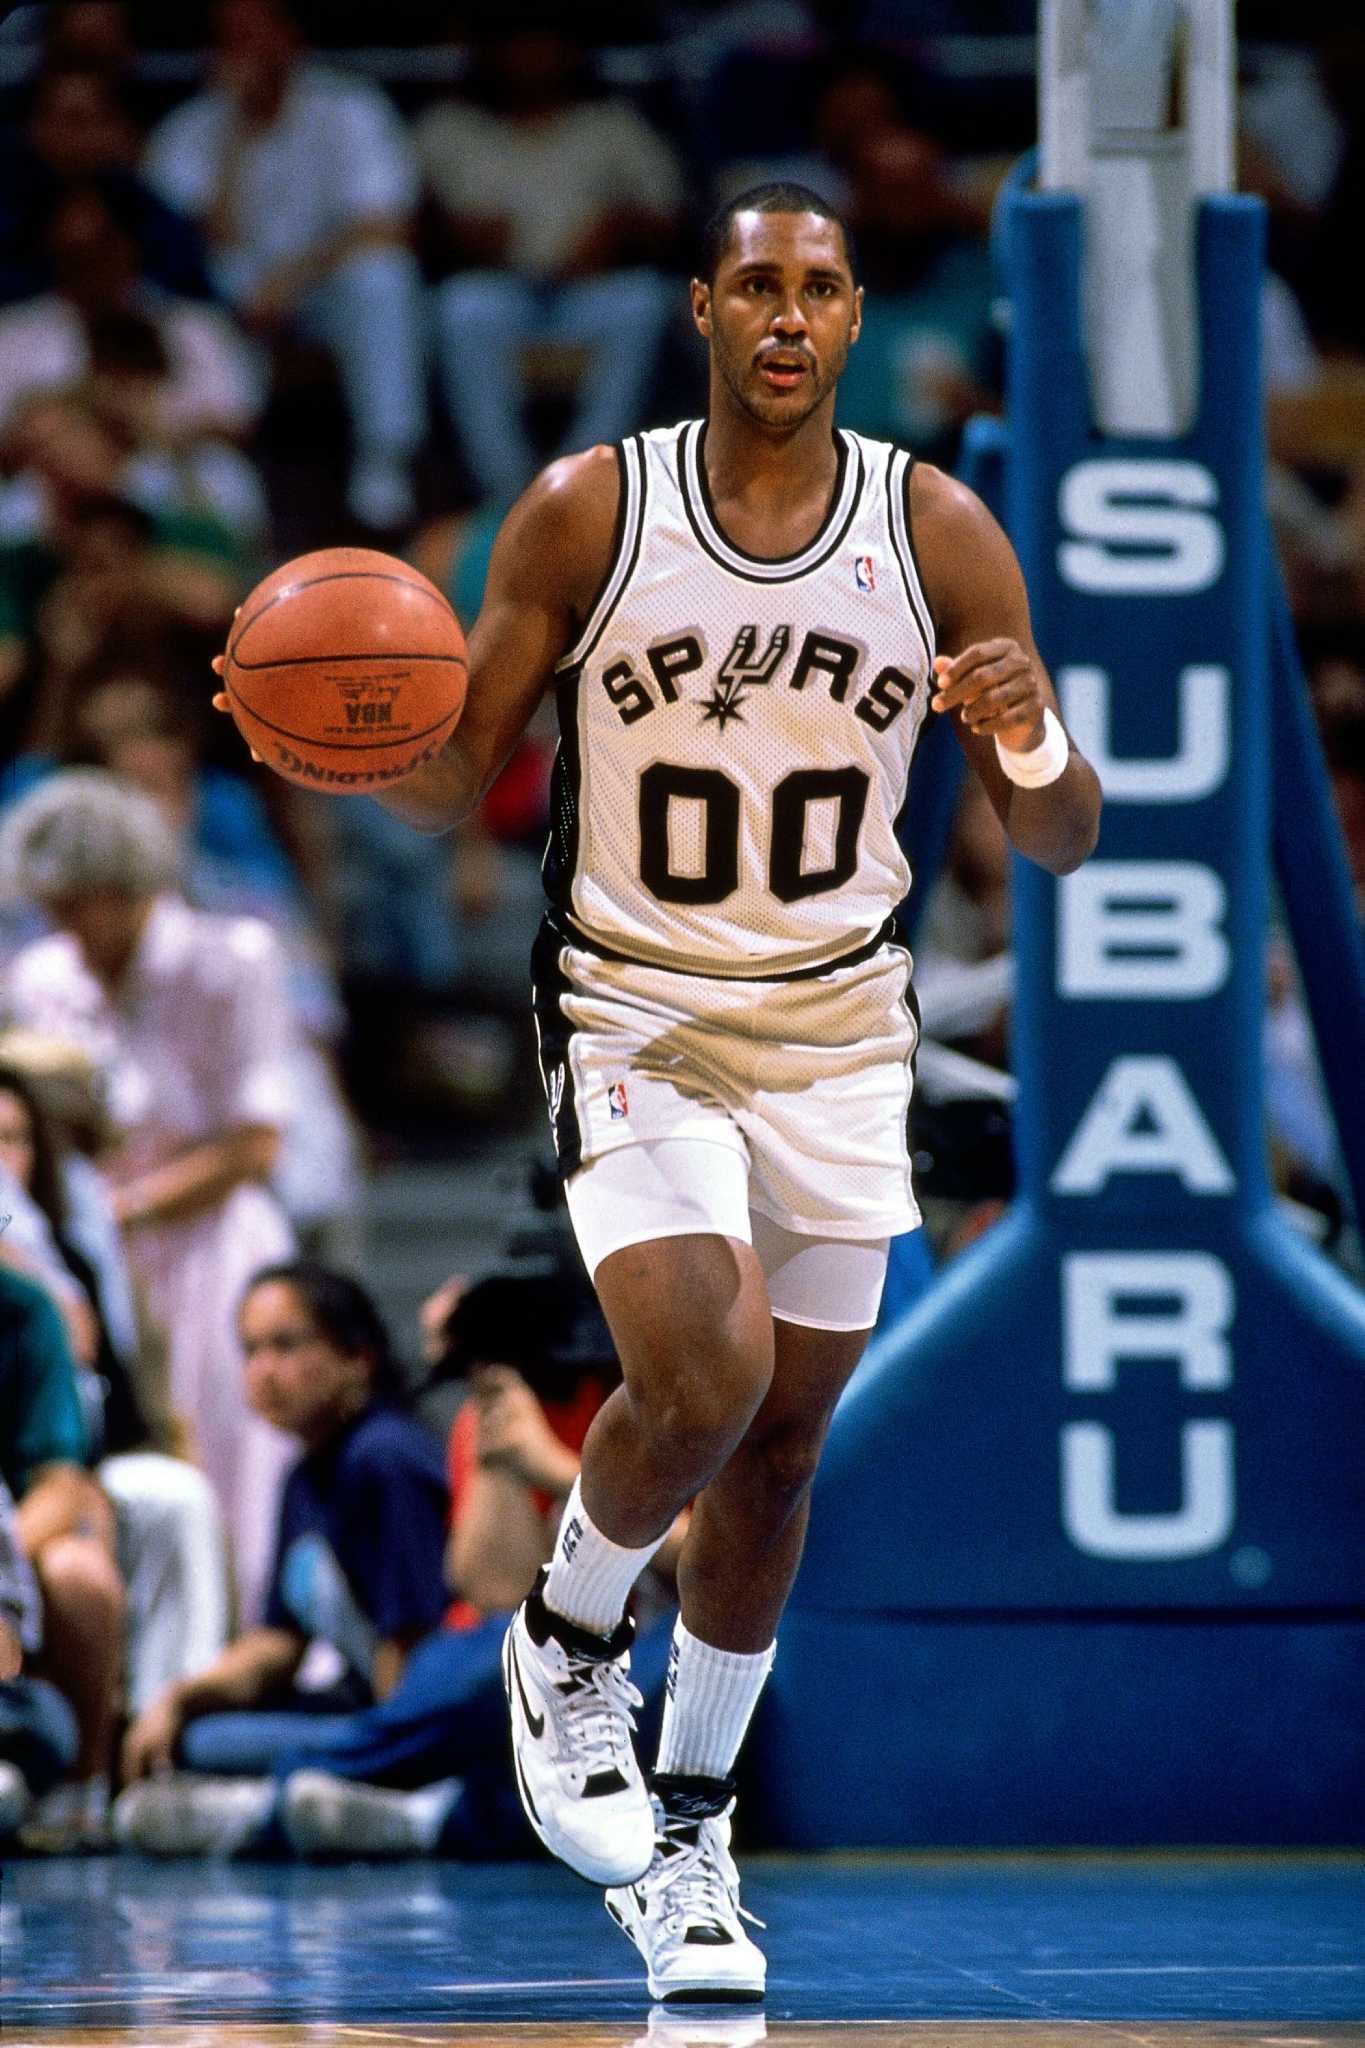 The Spurs' greatest players by jersey number, Part 1: From Moore to